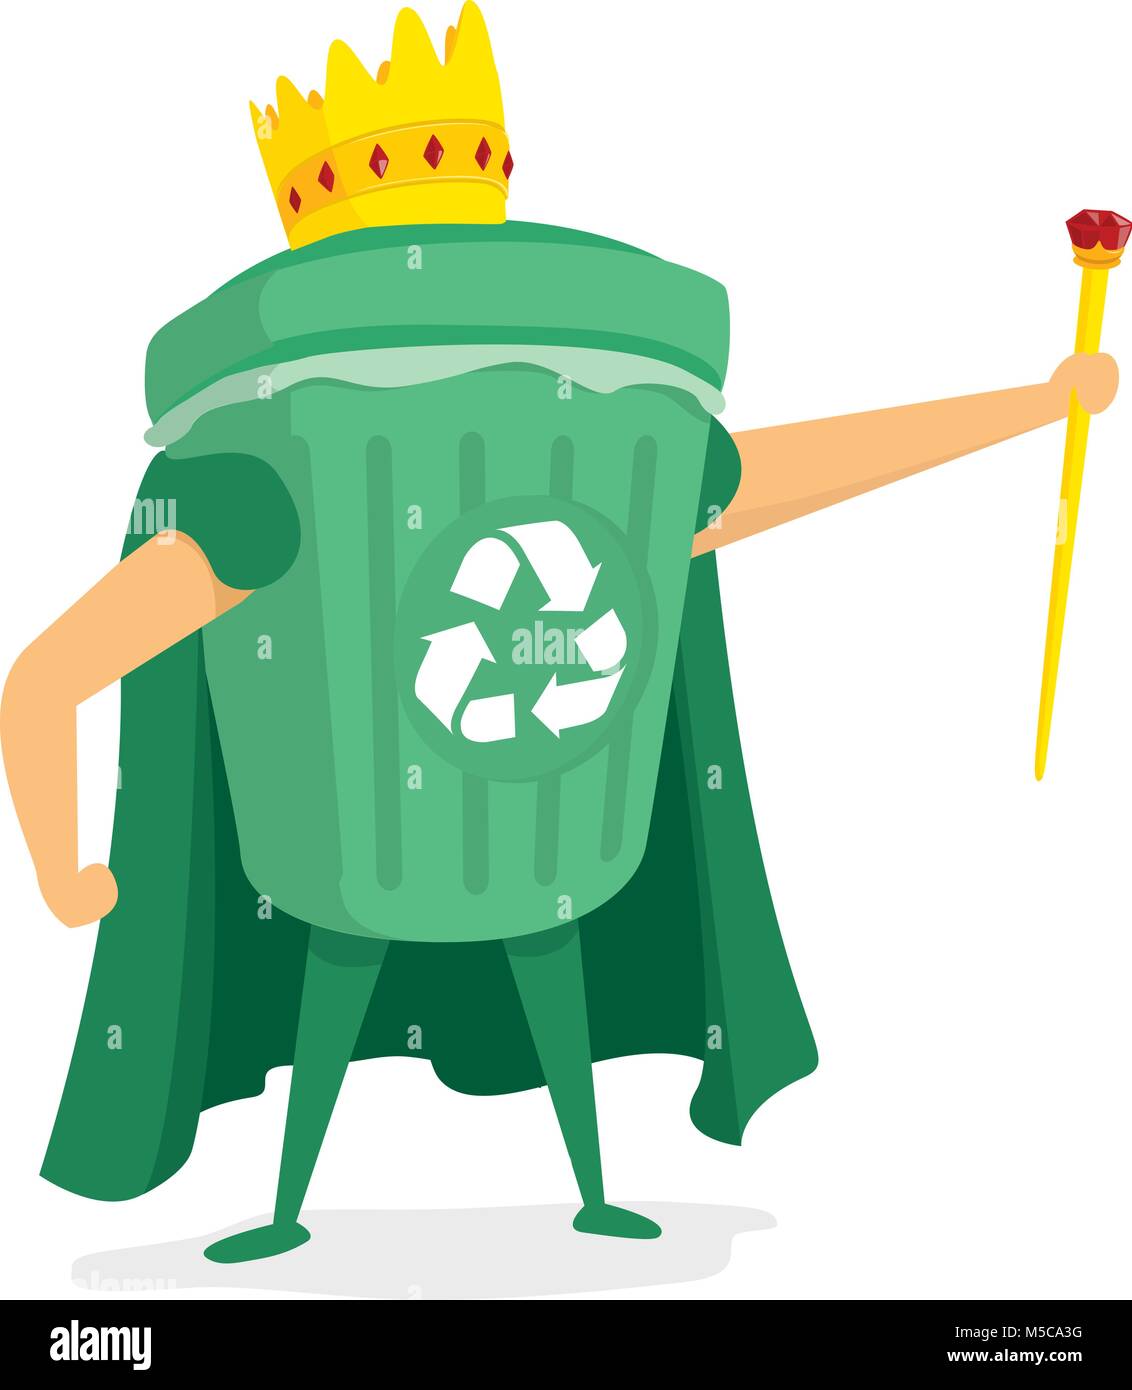 Cartoon illustration of recycle king with scepter Stock Vector